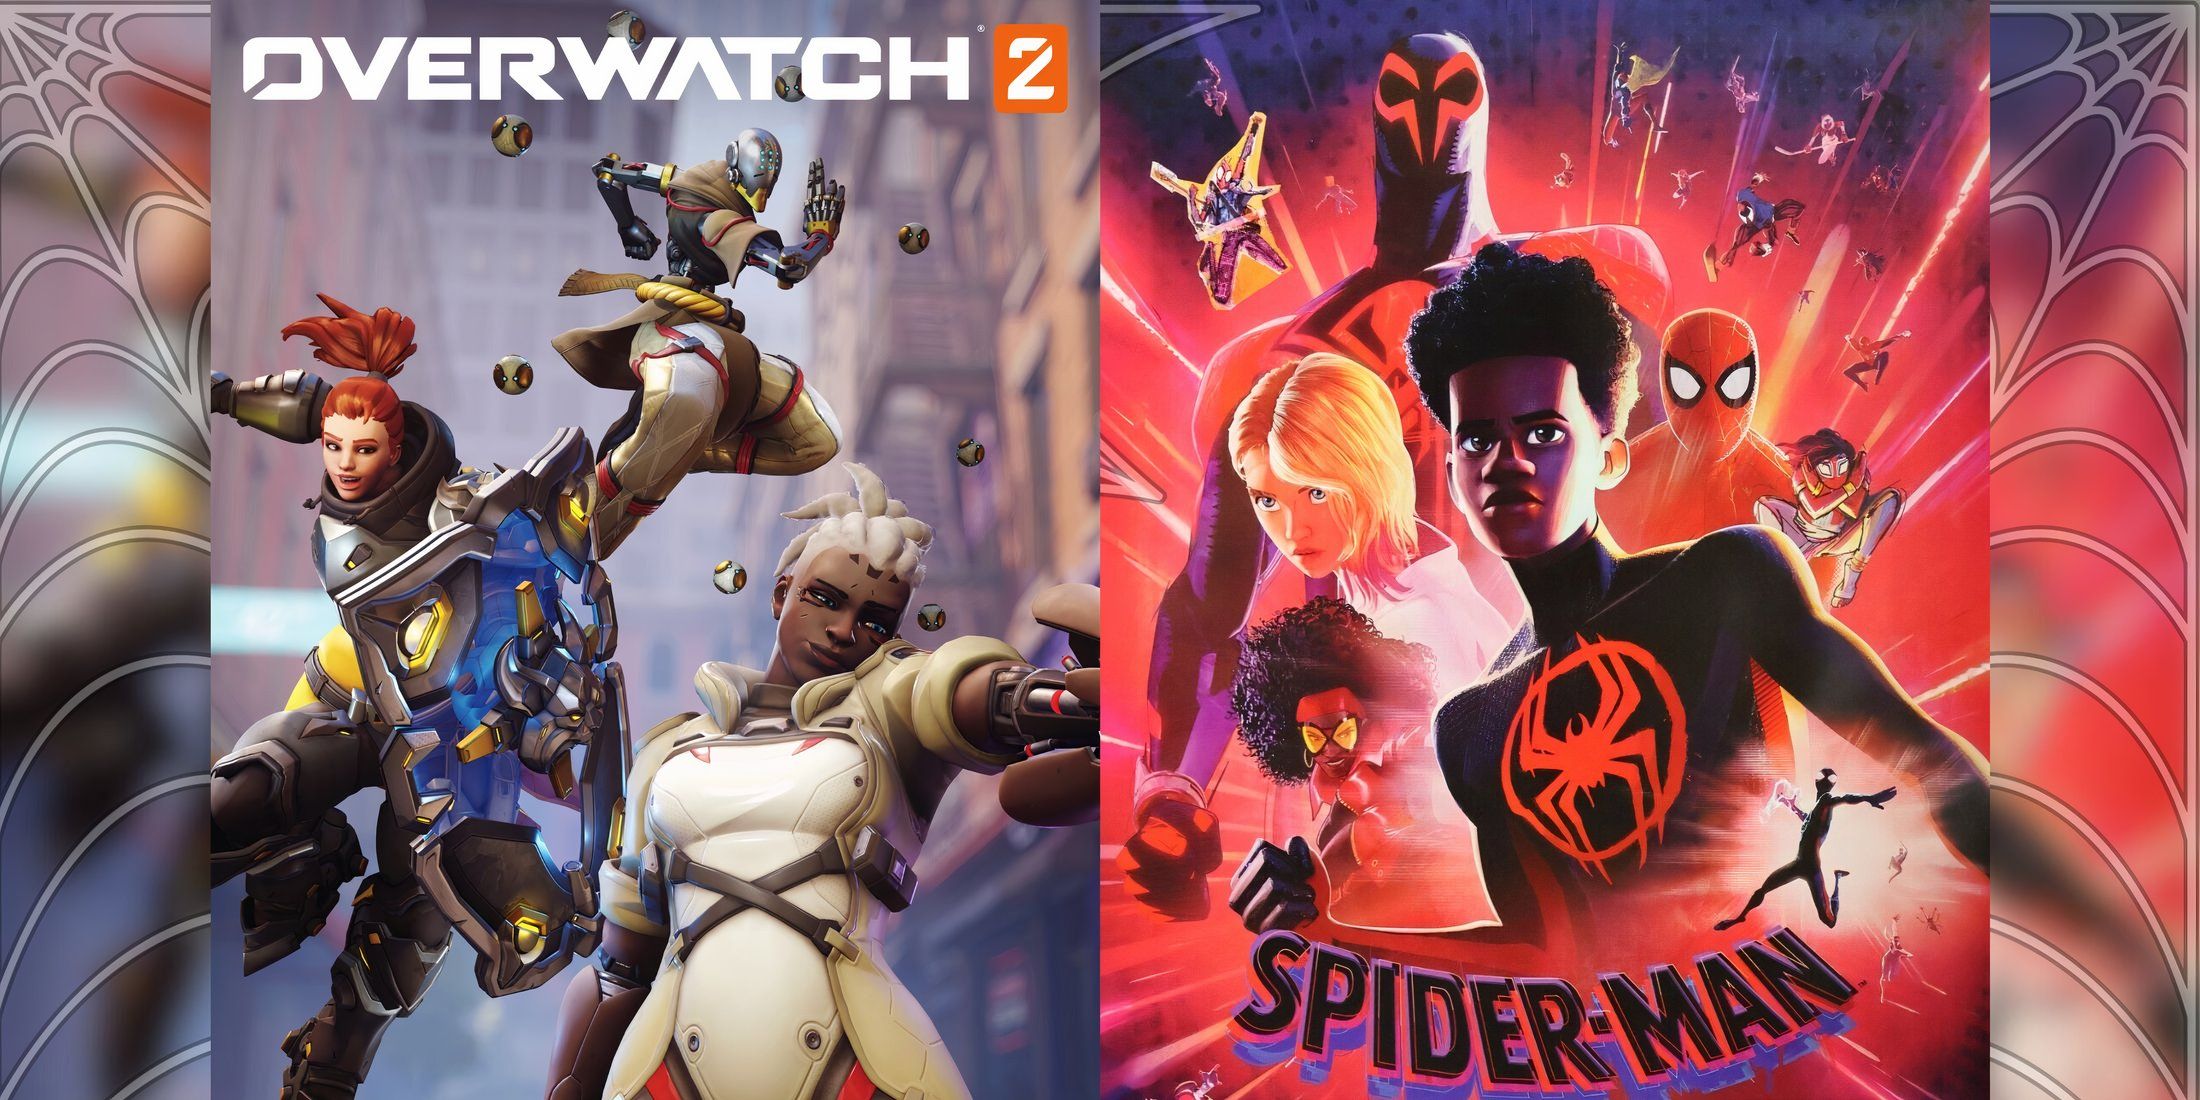 overwatch 2 and spider-verse posters side-by-side.